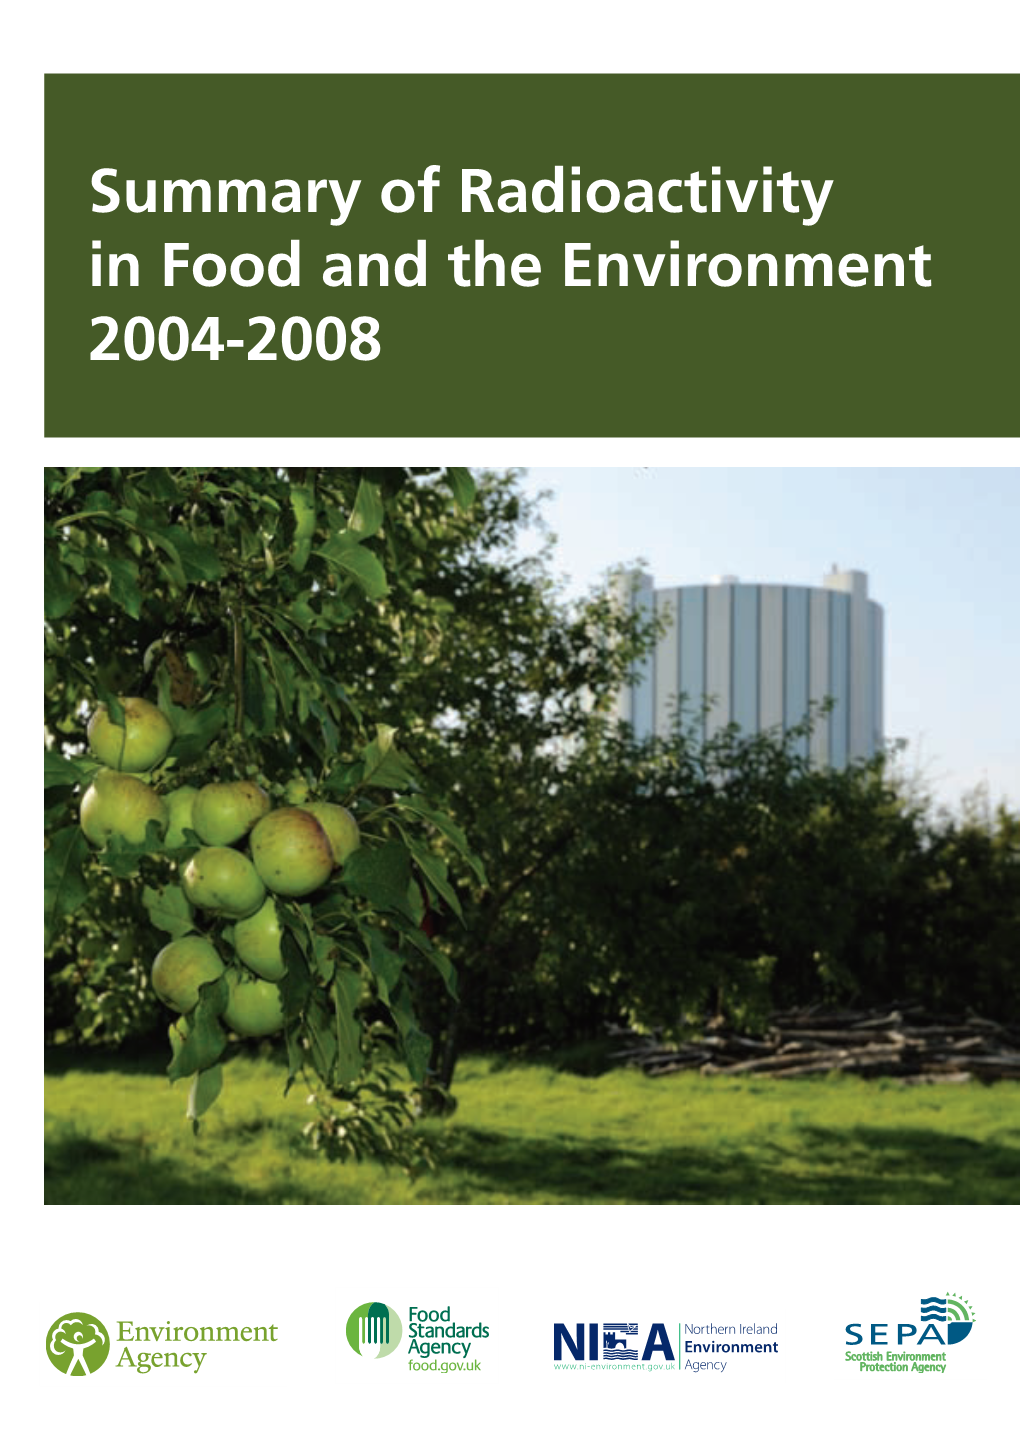 Summary of Radioactivity in Food and the Environment 2004-2008